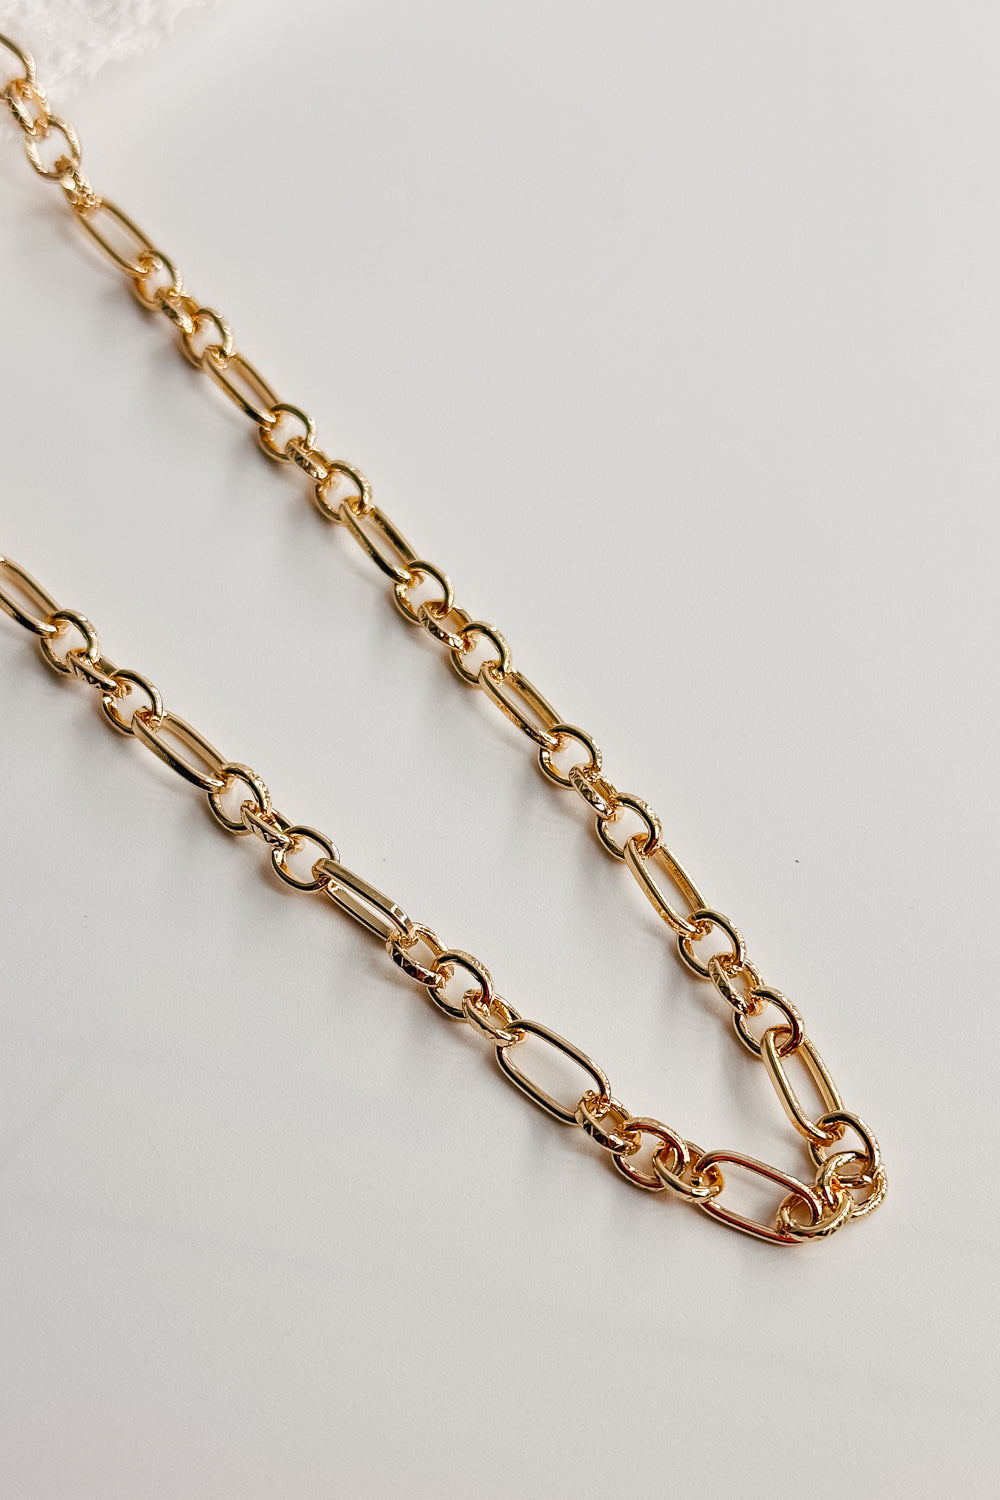 Image shows the bottom of the Kennedy Gold Chain Link Necklace against a white background. Necklace has gold circle and oval links. Shown without charms.